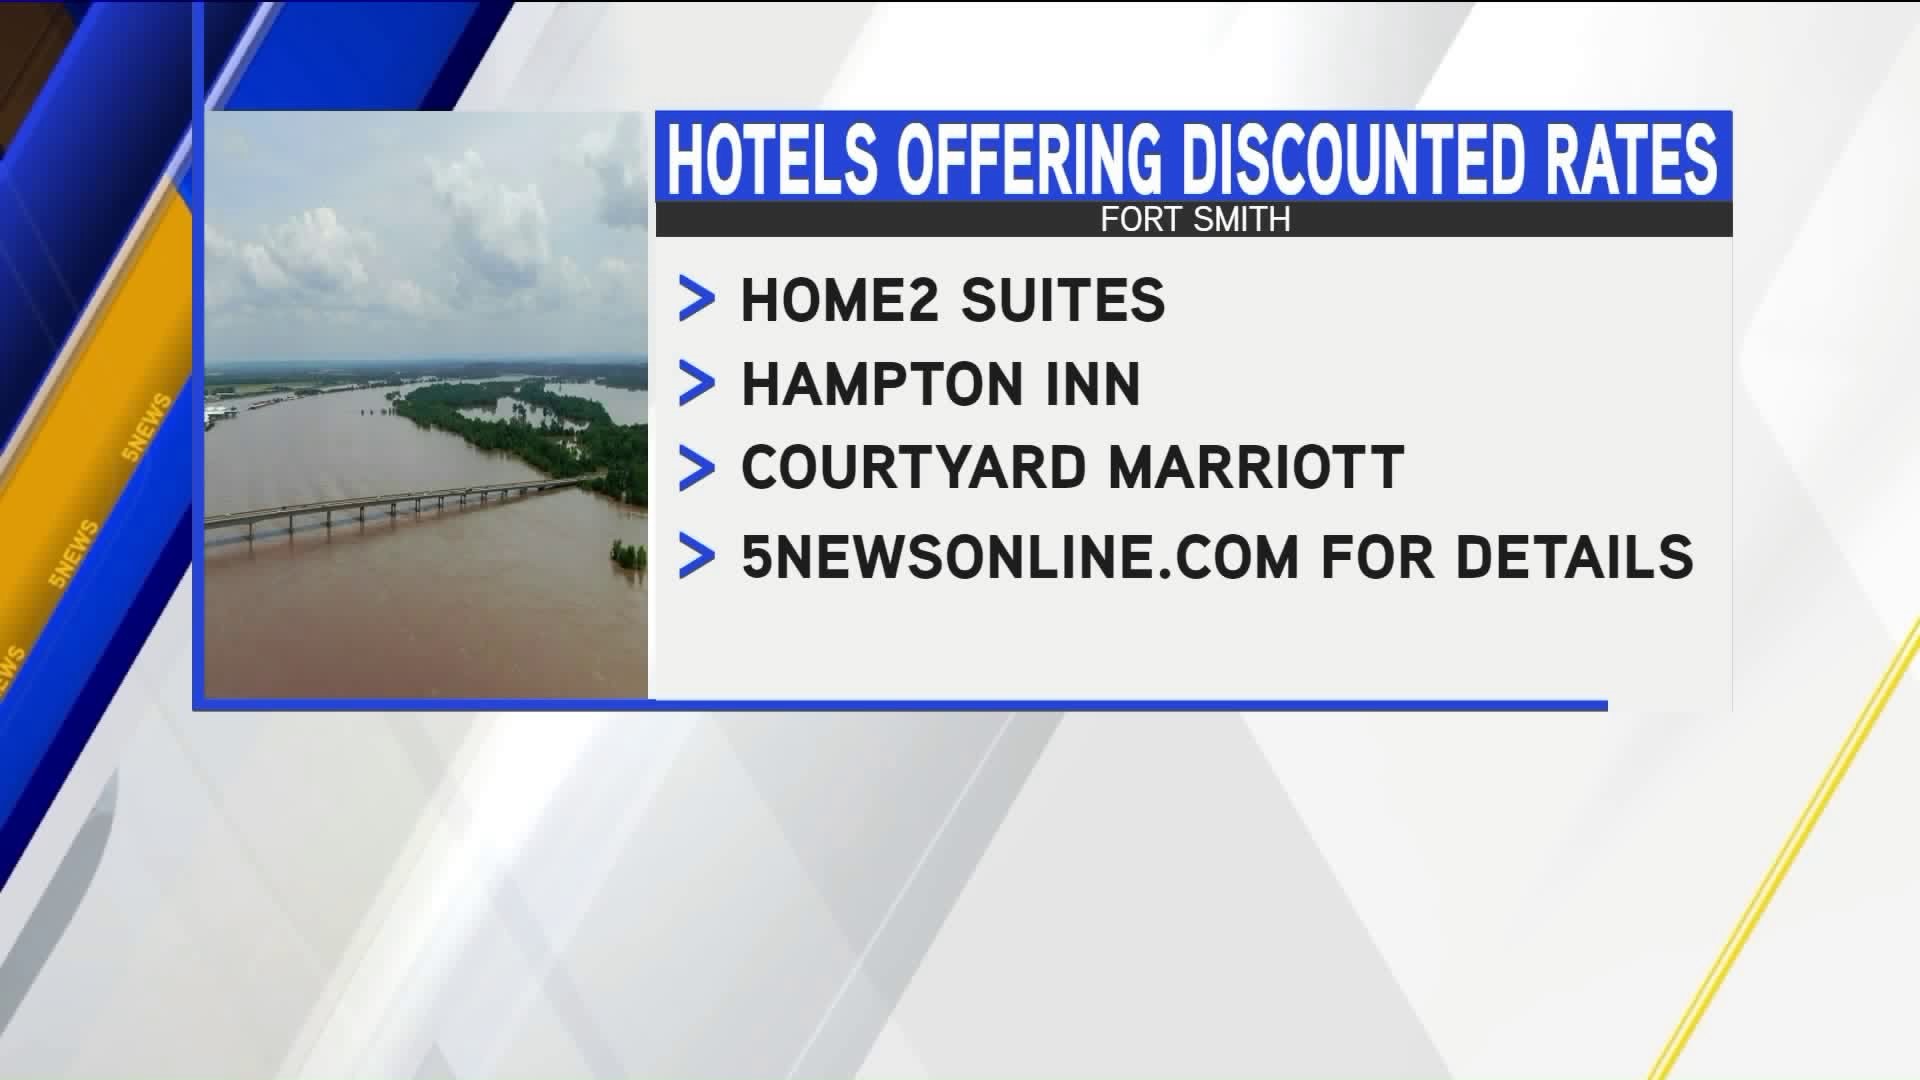 Hotels Offering Discounted Rates for Flood Victims